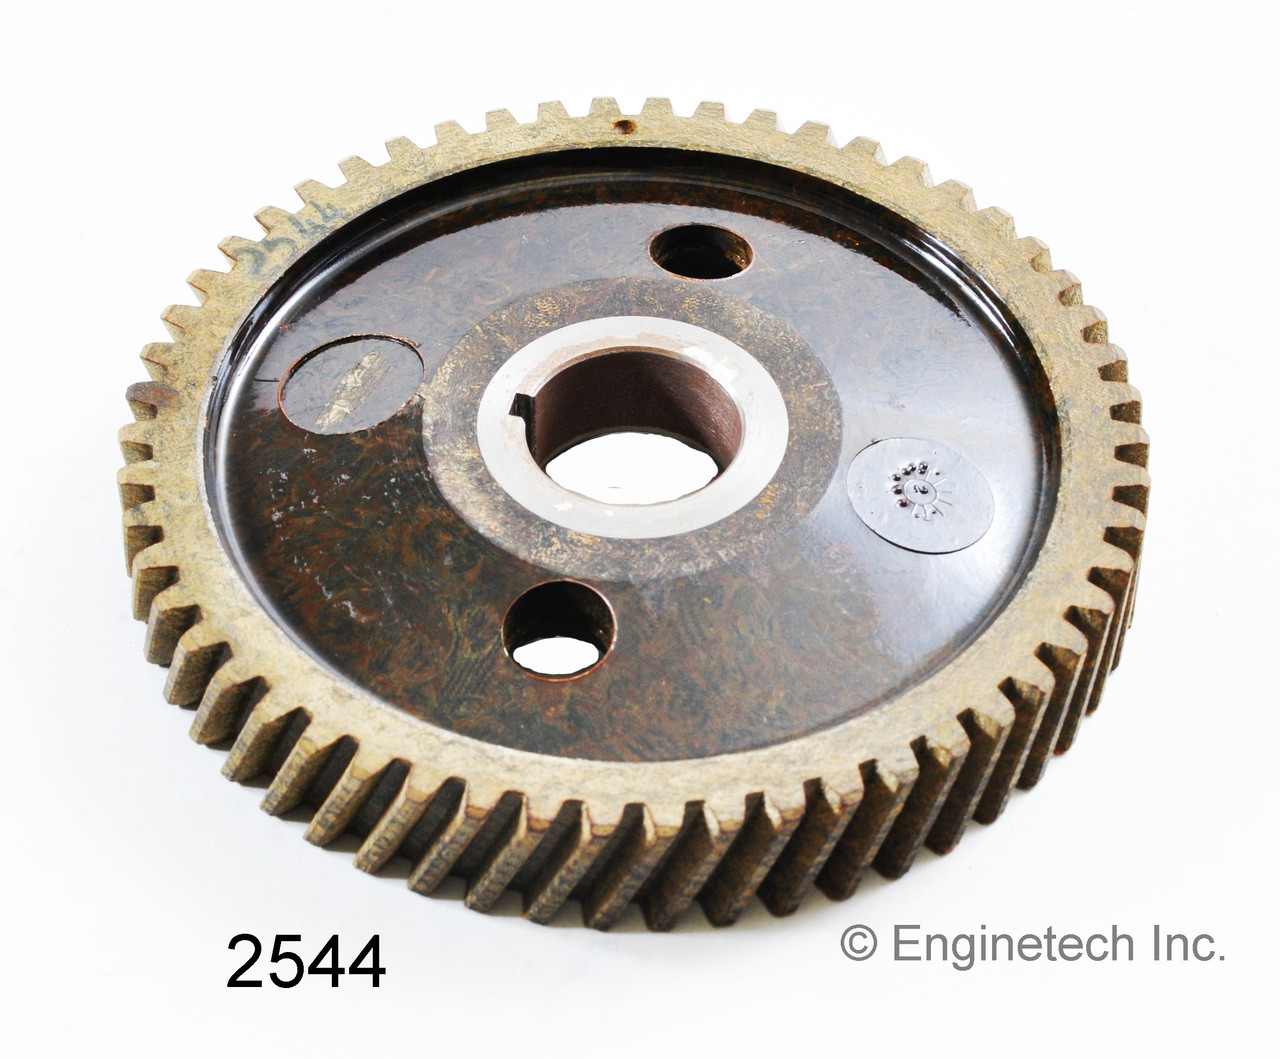 Timing Camshaft Gear - 1986 Buick Century 2.5L (2544.A6)